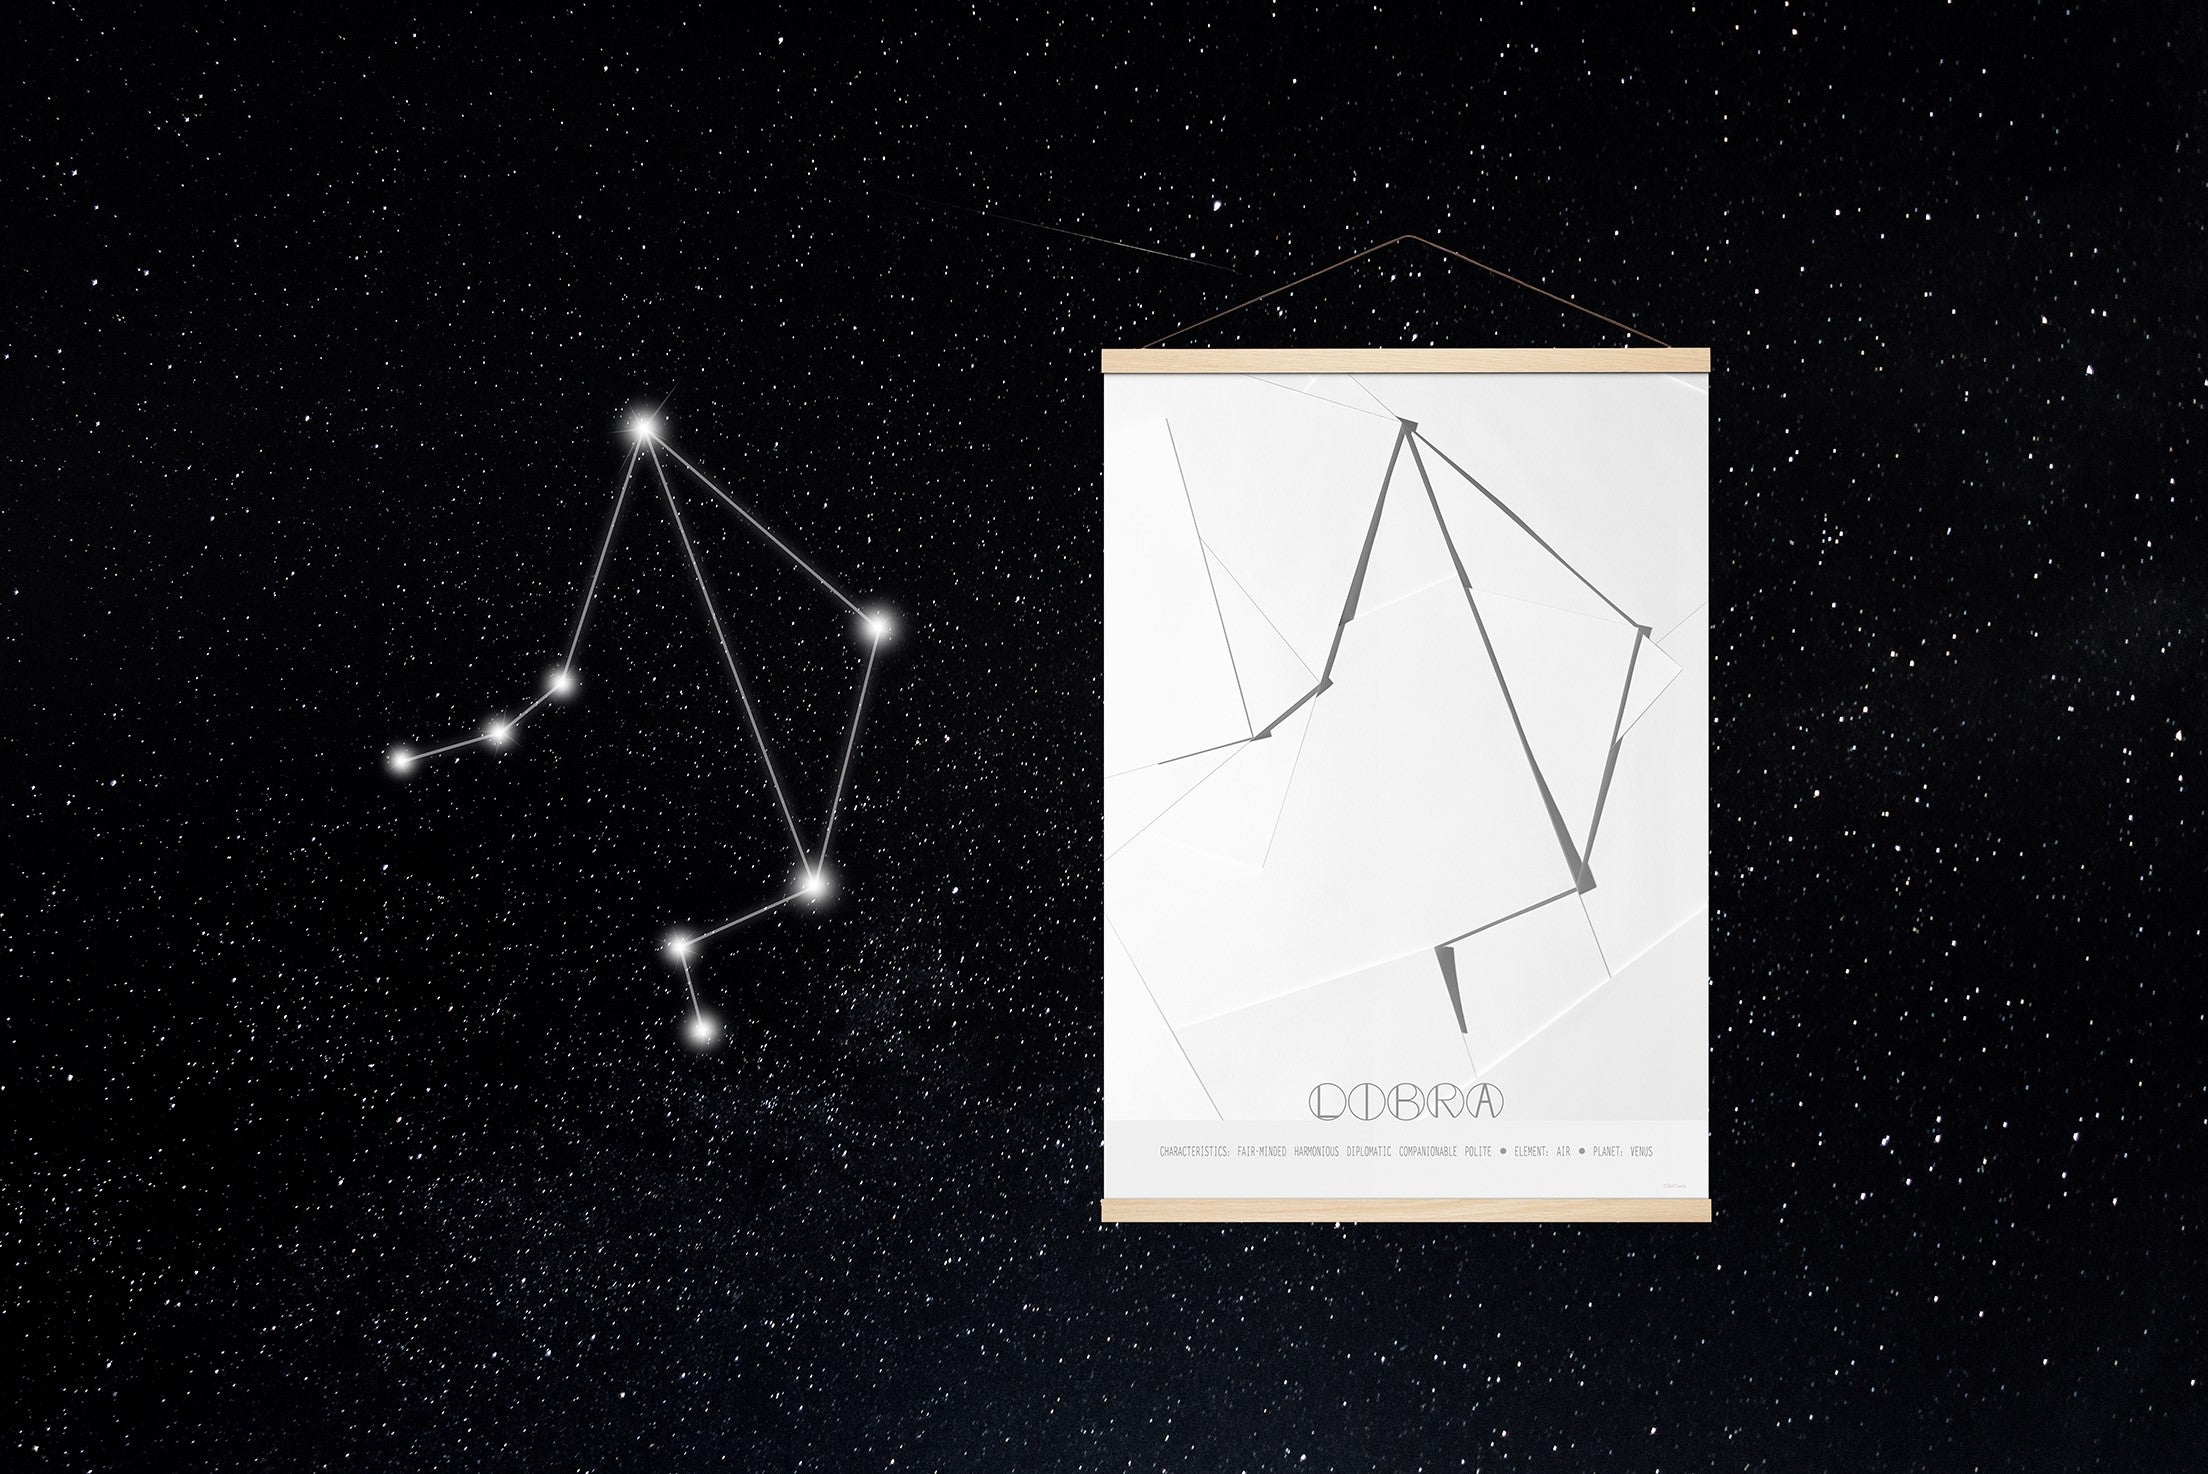 ChiCura Living, Art & Frames Libra - The Scales - A5 Posters / Zodiac Signs Black / White